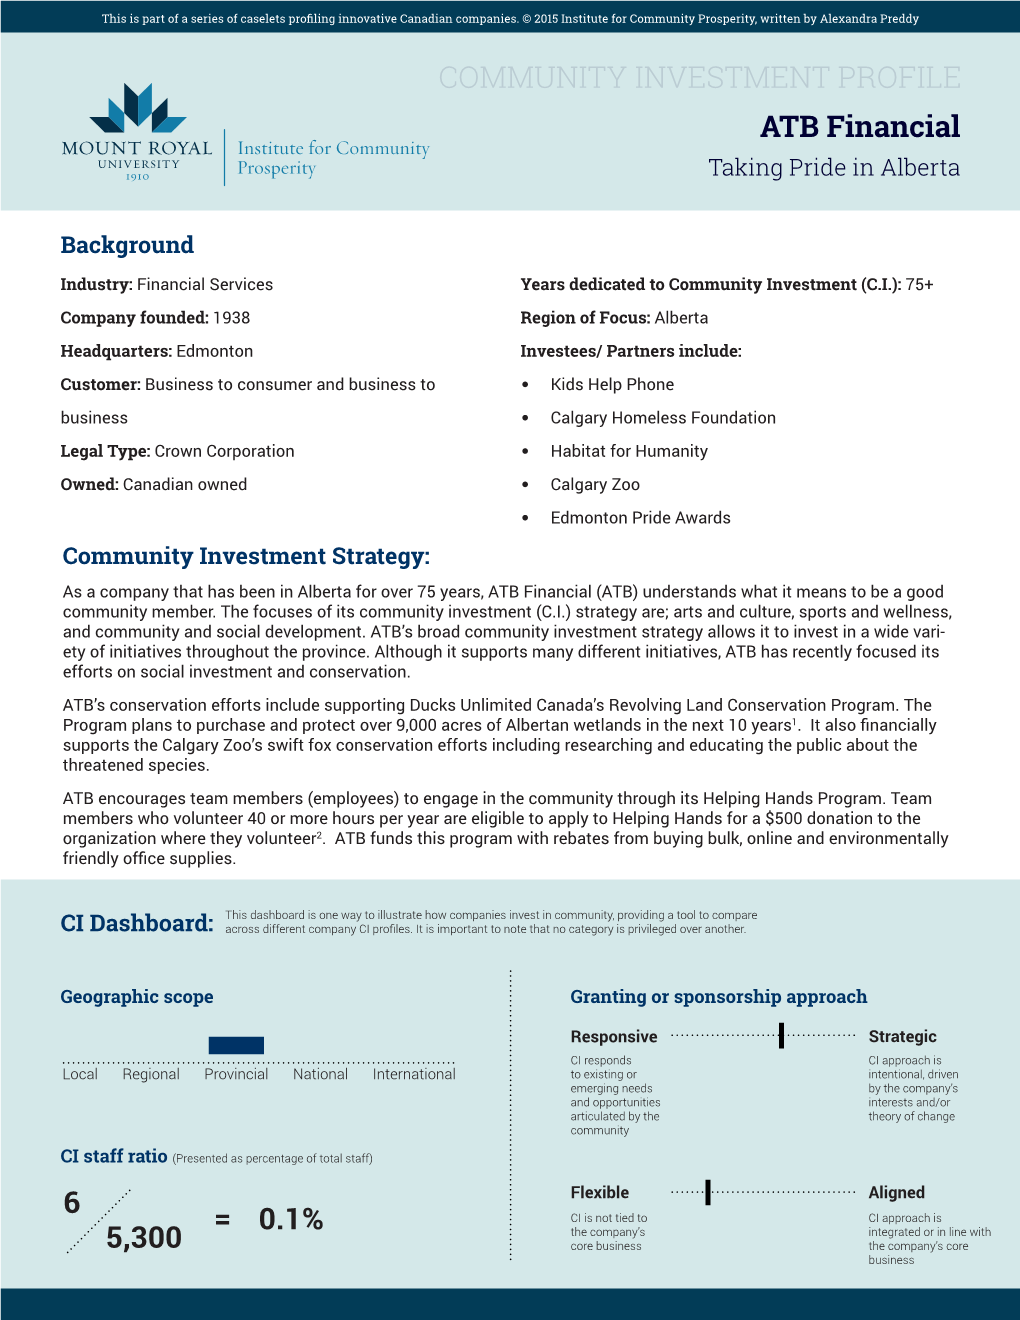 COMMUNITY INVESTMENT PROFILE ATB Financial 6 5,300 0.1% =